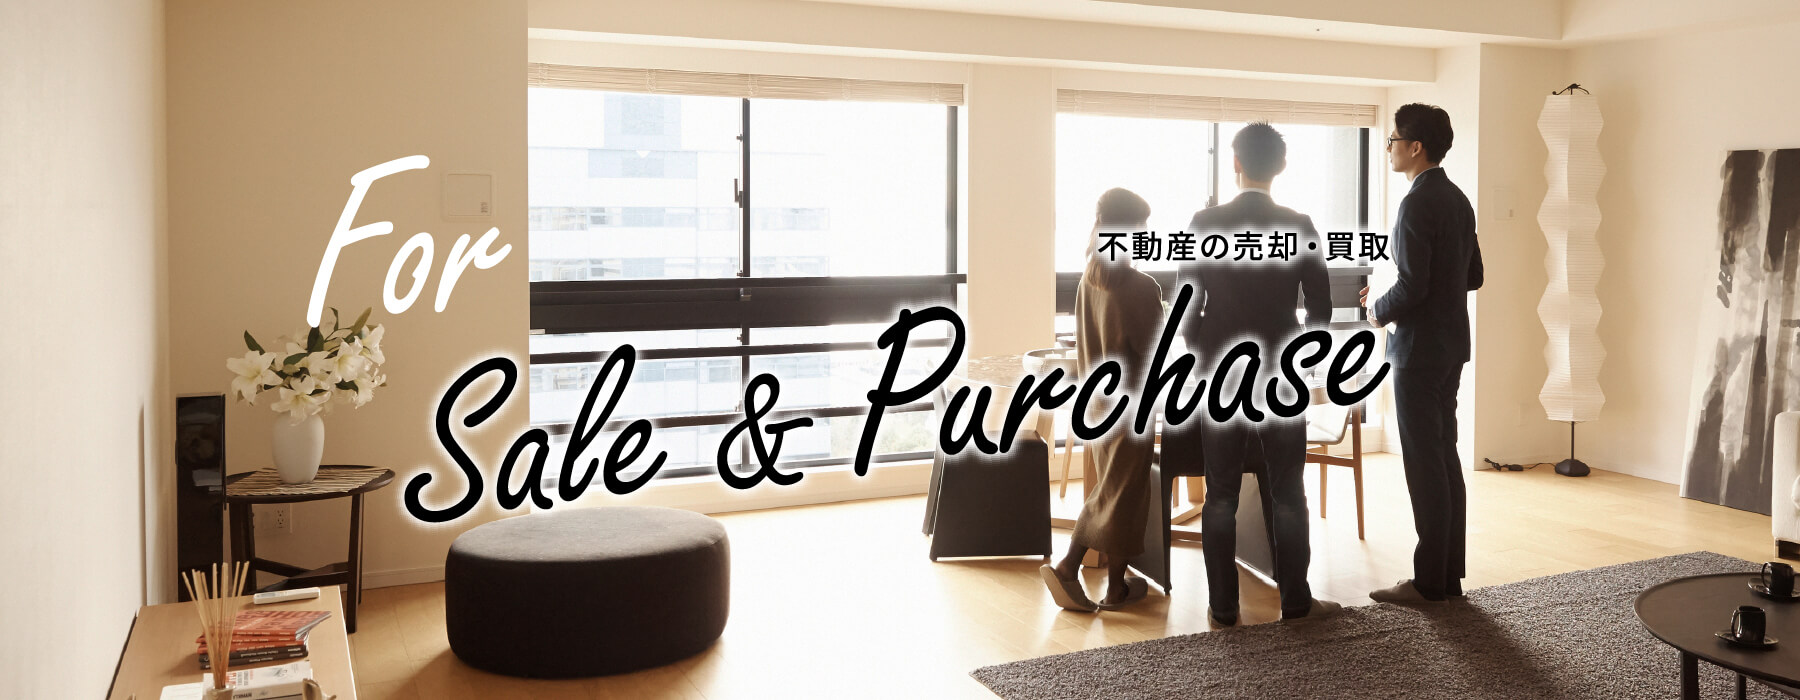 For Sale & Purchase不動産の売却・買取